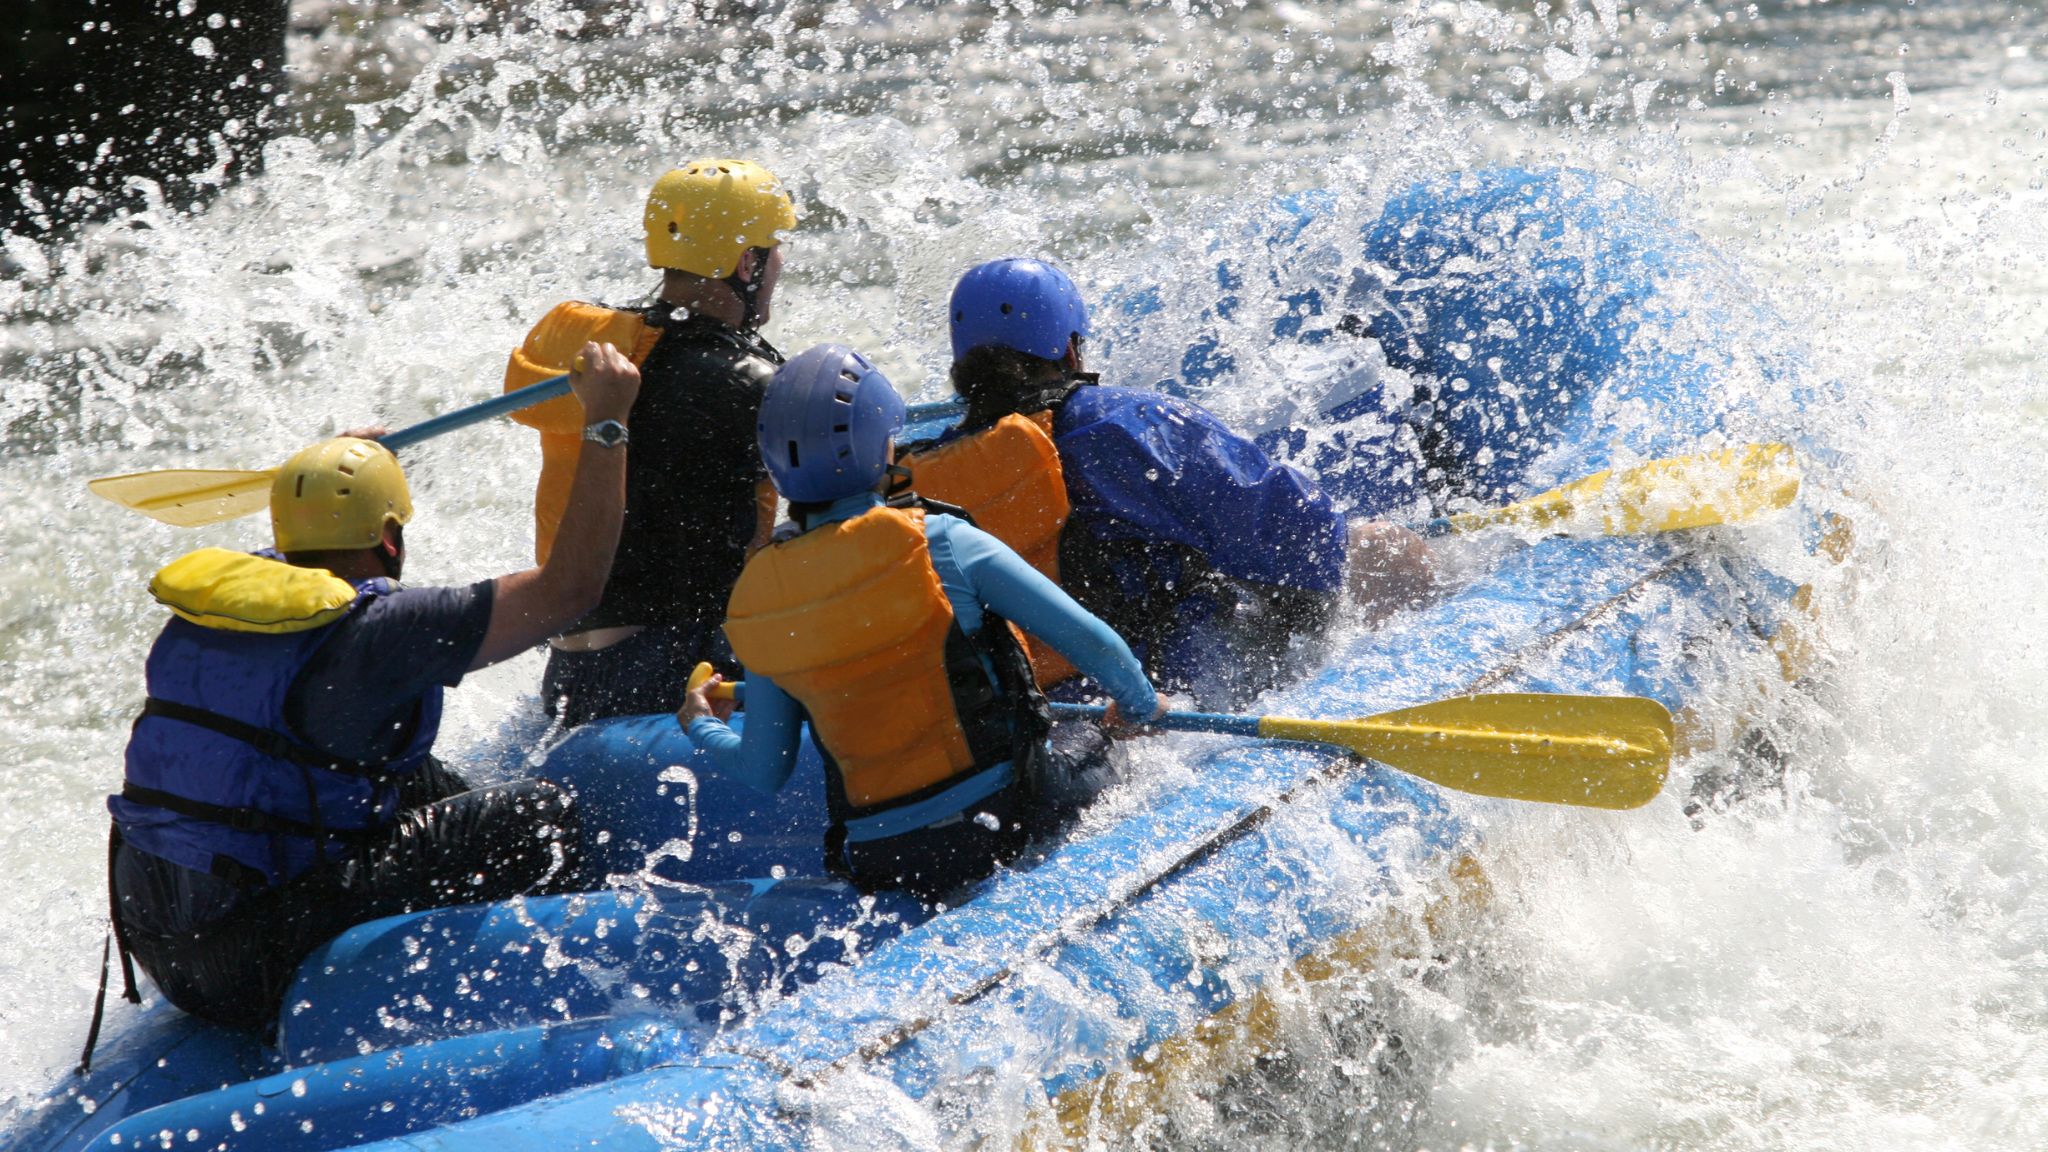 Day 5 Take Part In An Exhilarating Rafting Adventure